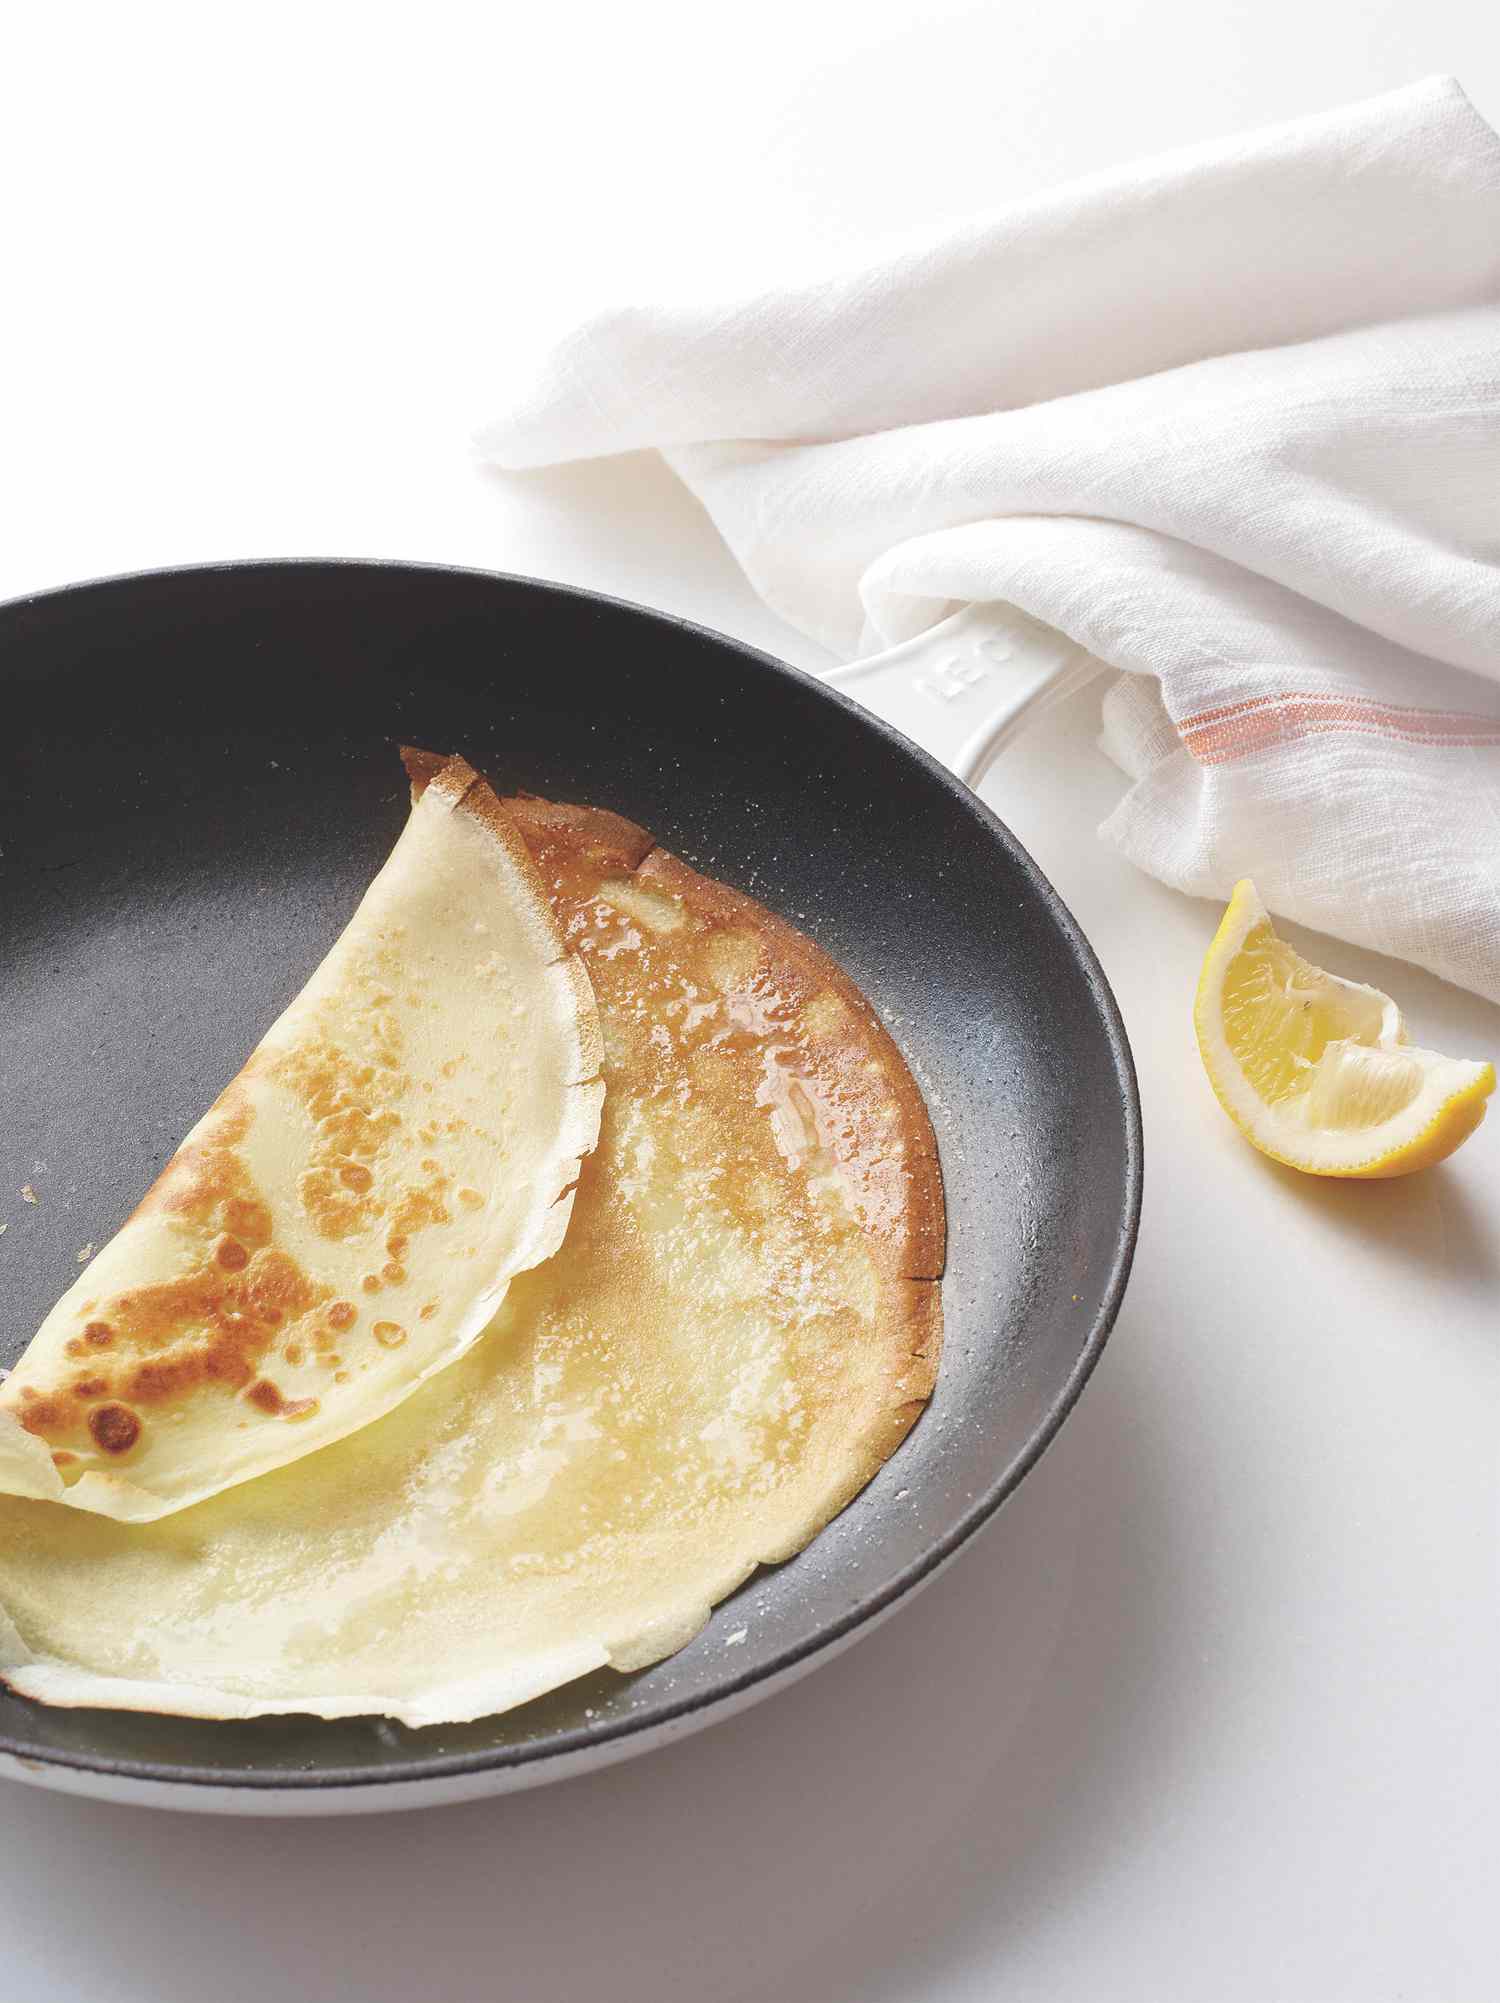 How To Make Crepes At Home